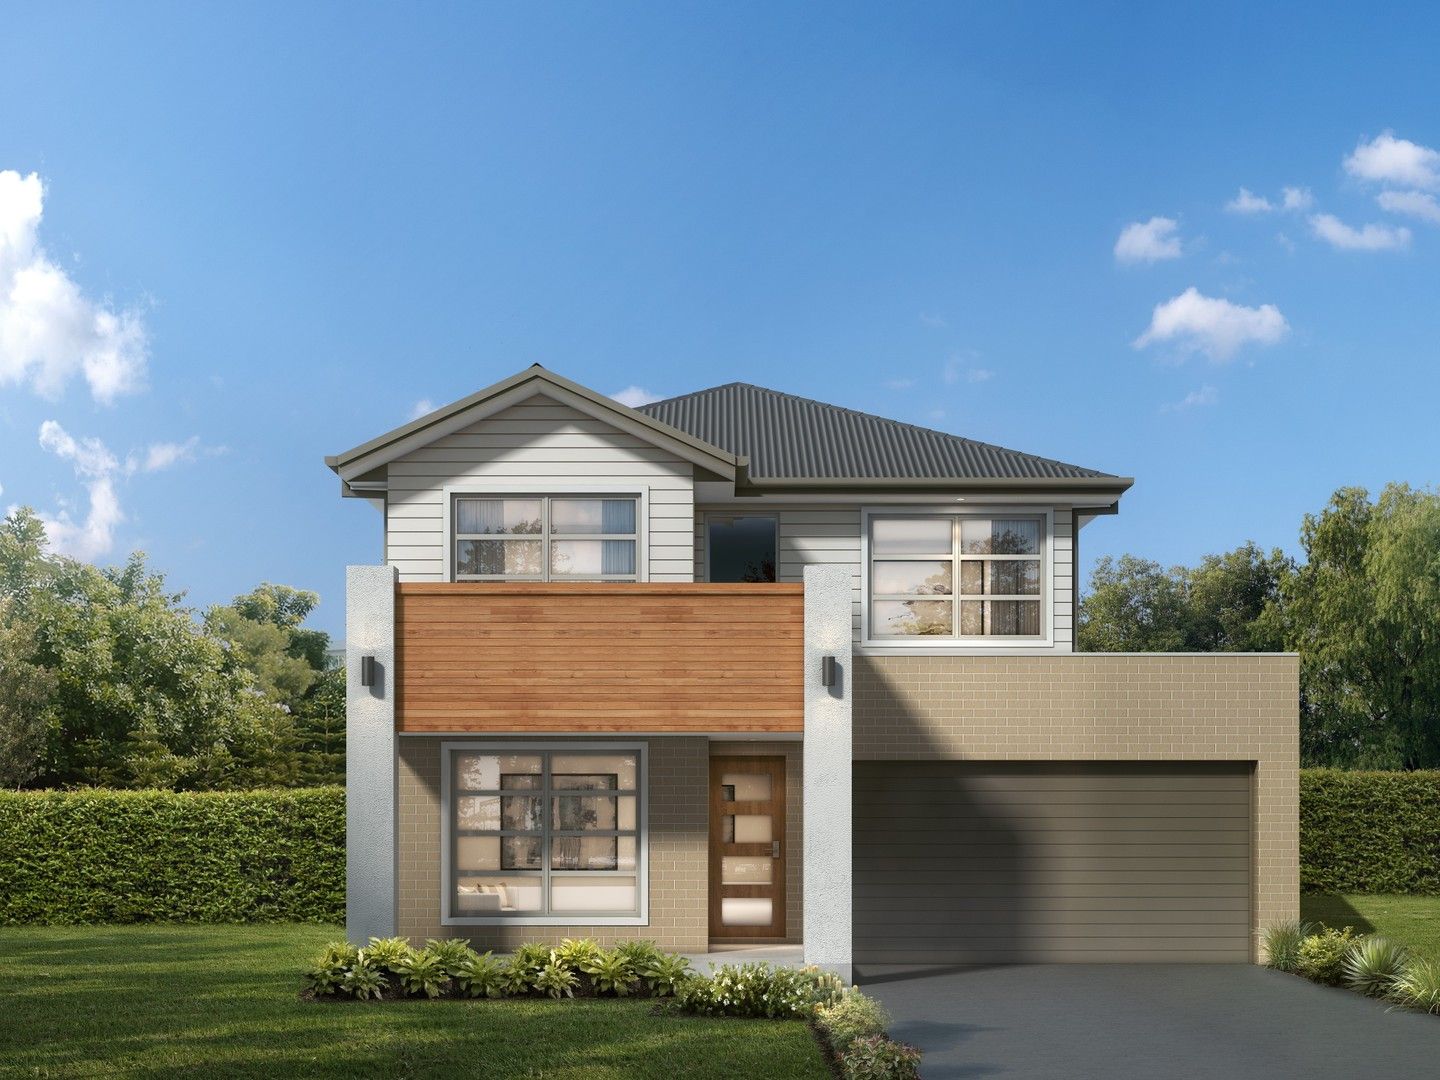 5 bedrooms New House & Land in Lot 2804 Kalinda Avenue BOX HILL NSW, 2765